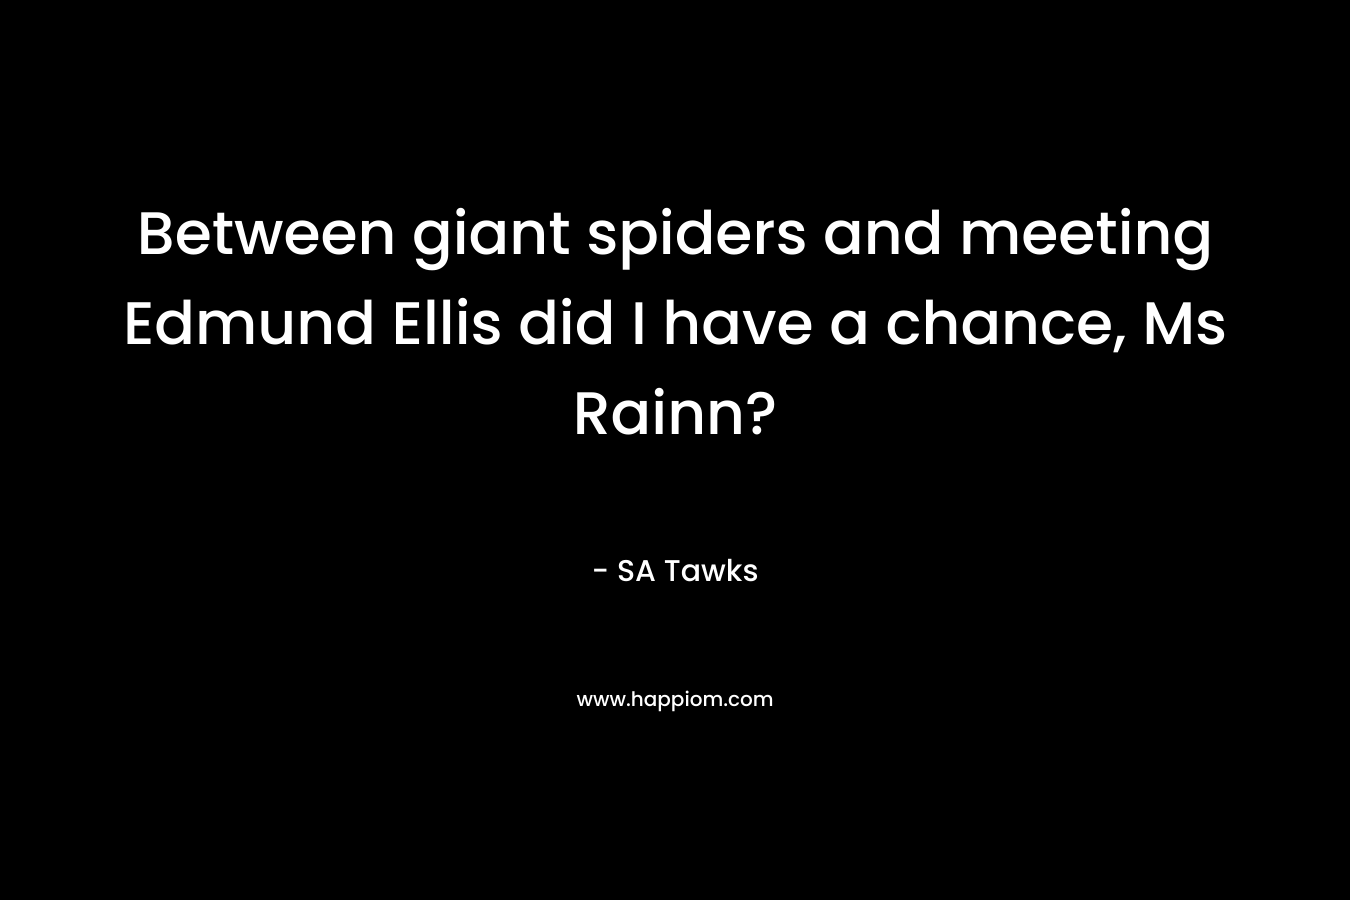 Between giant spiders and meeting Edmund Ellis did I have a chance, Ms Rainn?